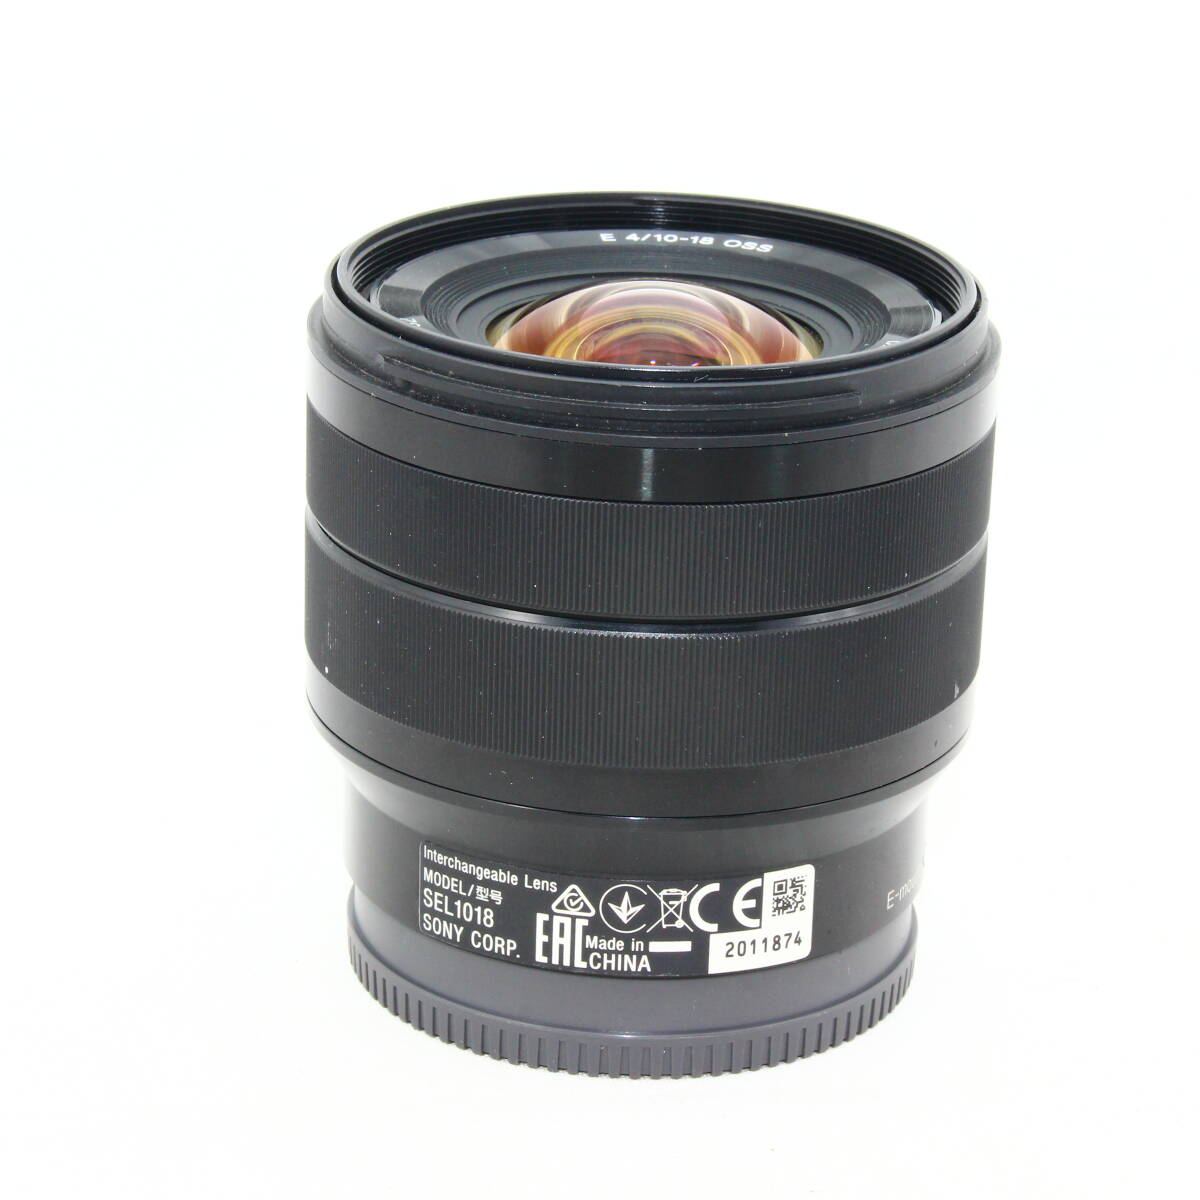  Sony SONY wide-angle zoom lens APS-C E 10-18mm F4 OSS SEL1018 present condition goods #2404038